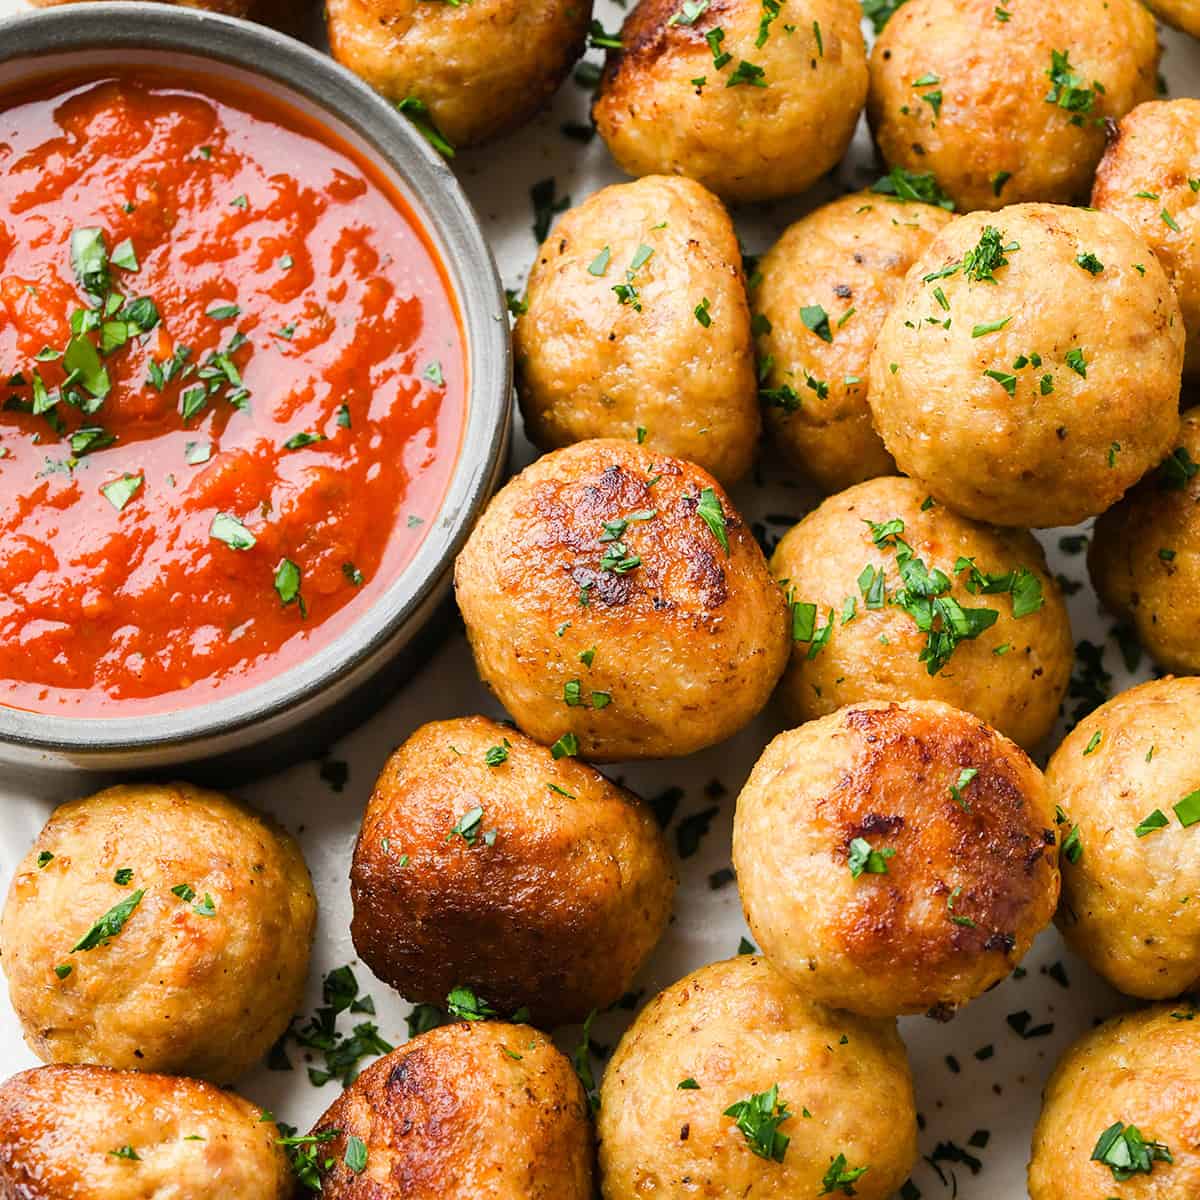 Chicken Meatballs garnished with parsley with a bowl of marinara sauce for dipping